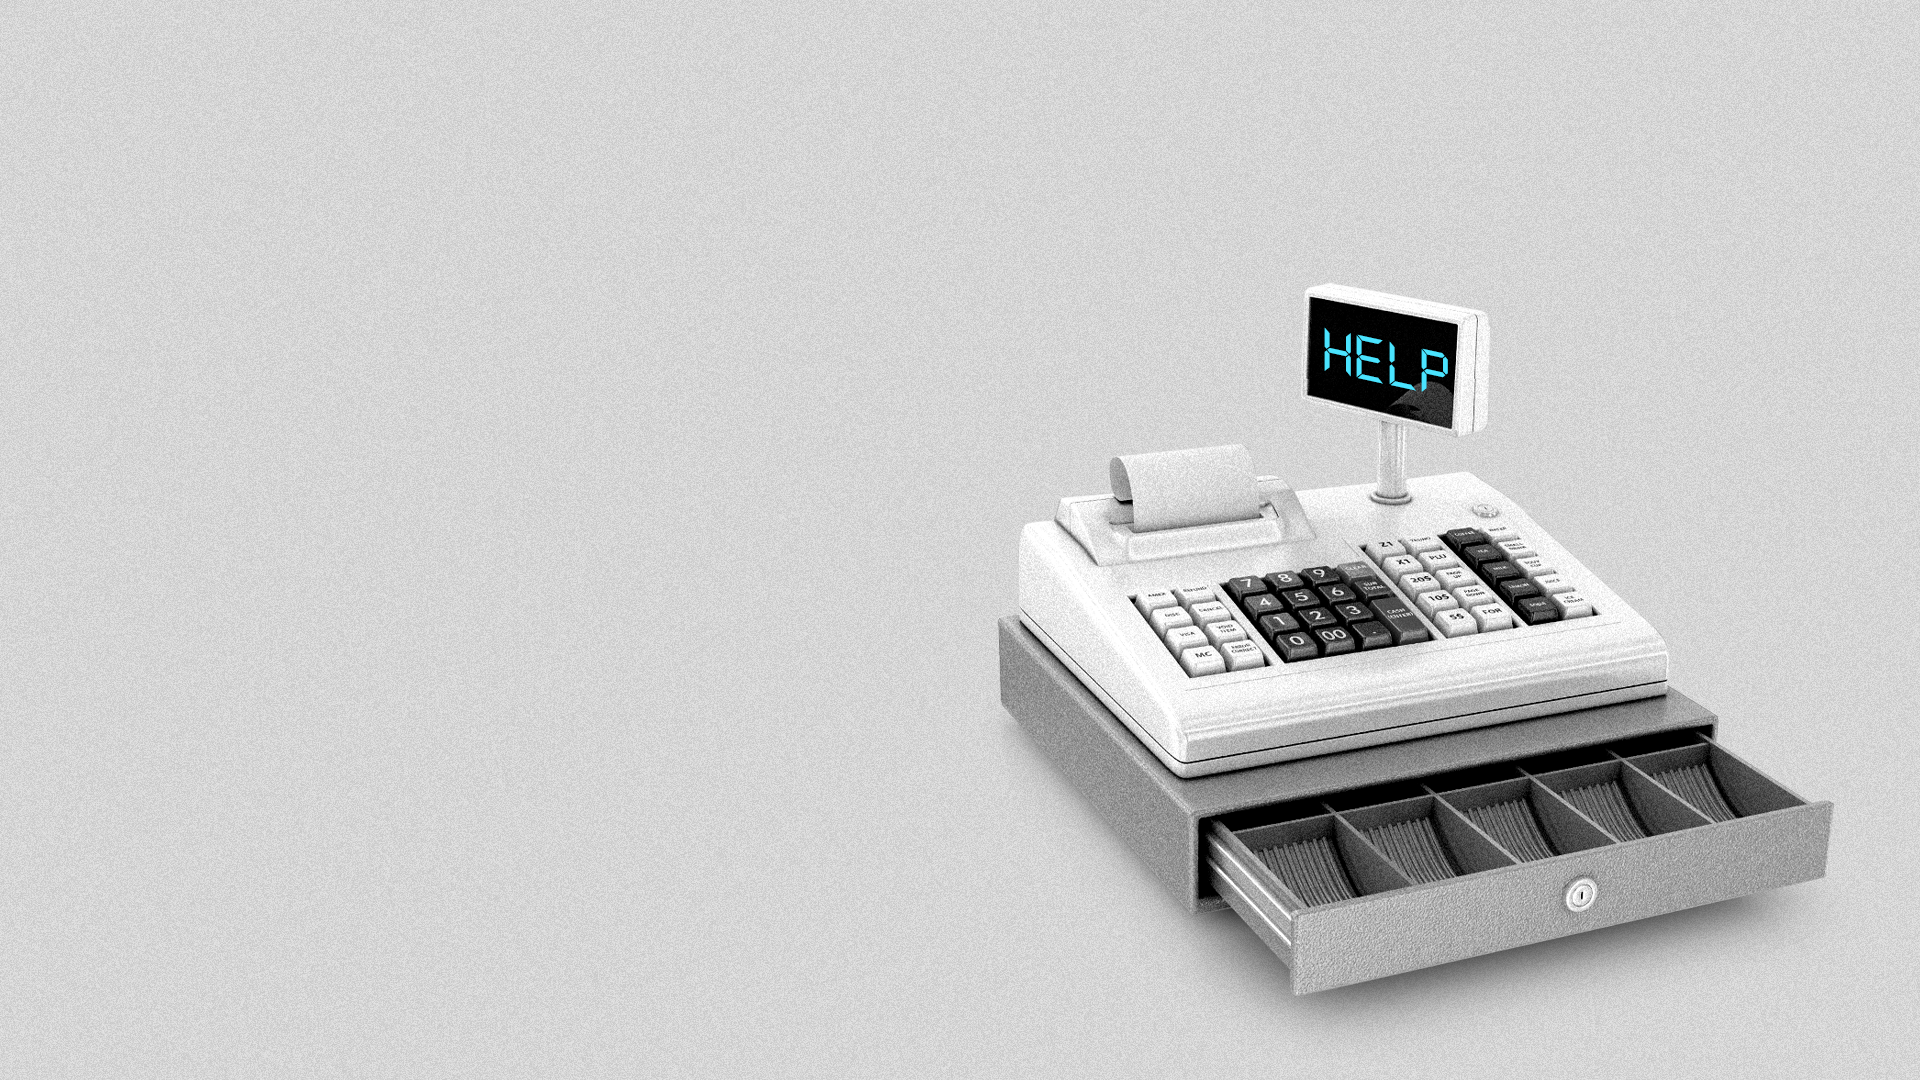 Illustration of an empty cash register with it's display flashing "HELP". 